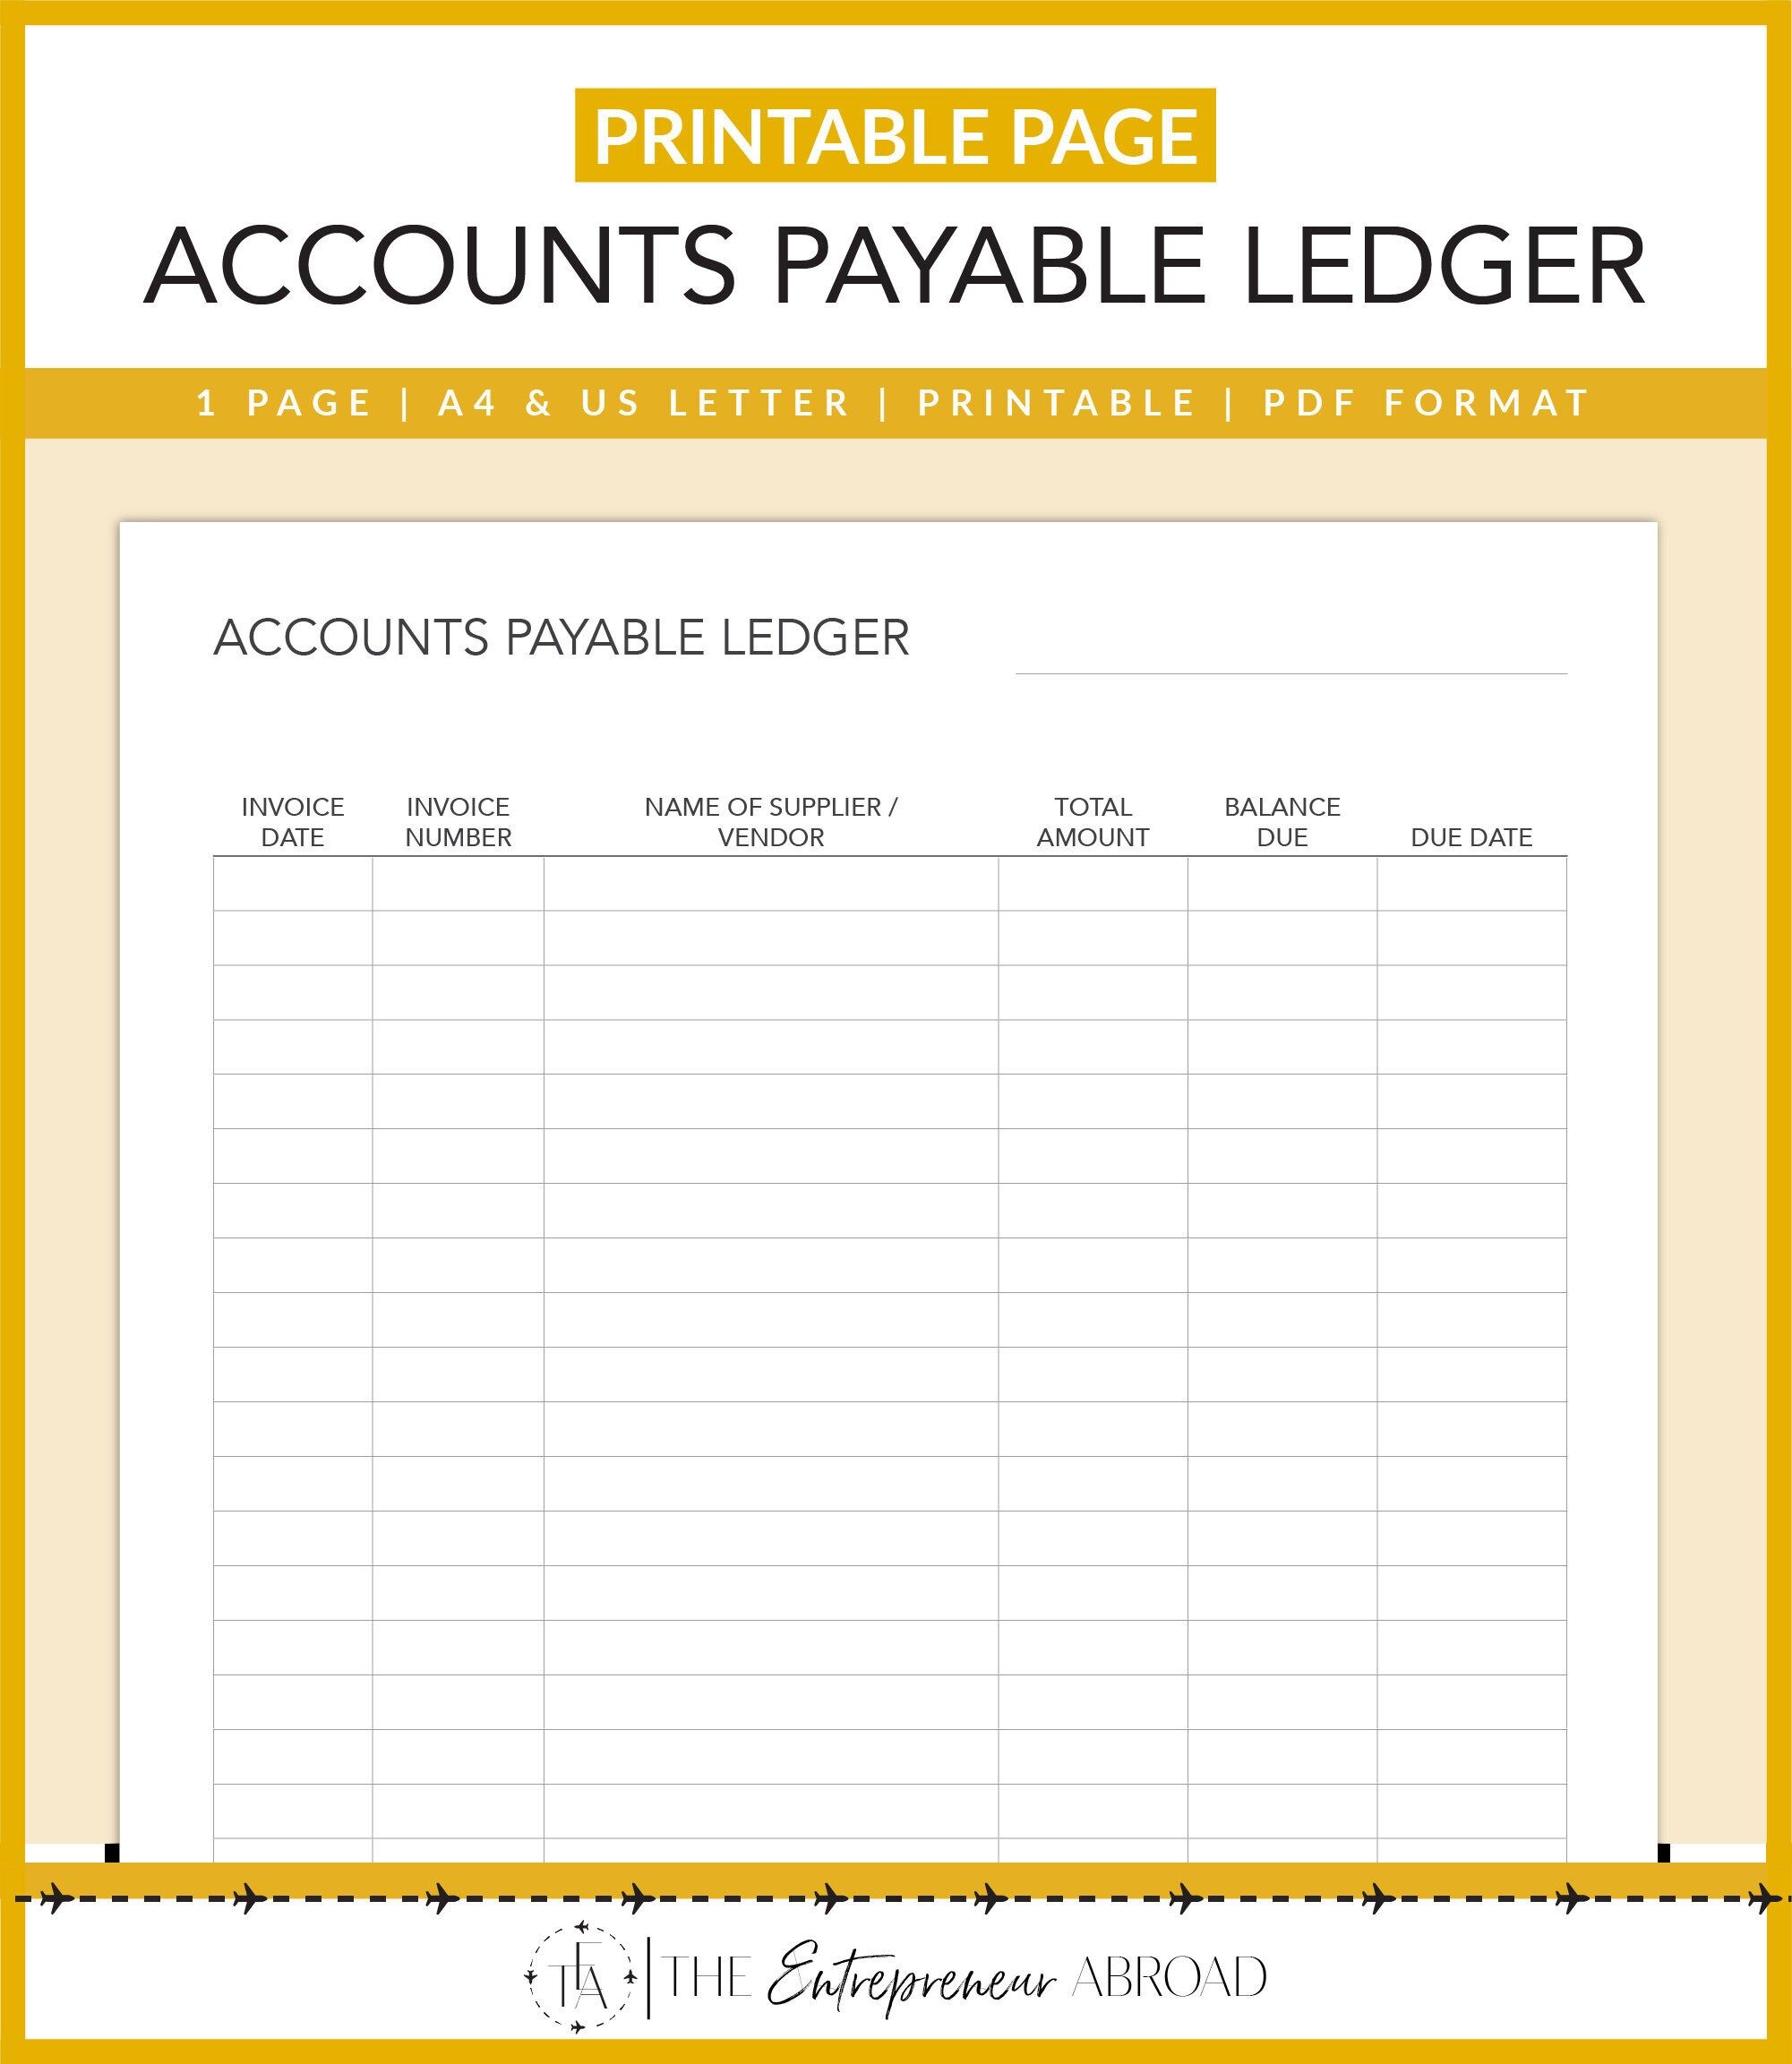 Why Does the AP Ledger Require a Subsidiary Ledger? | Small Business - cointime.fun